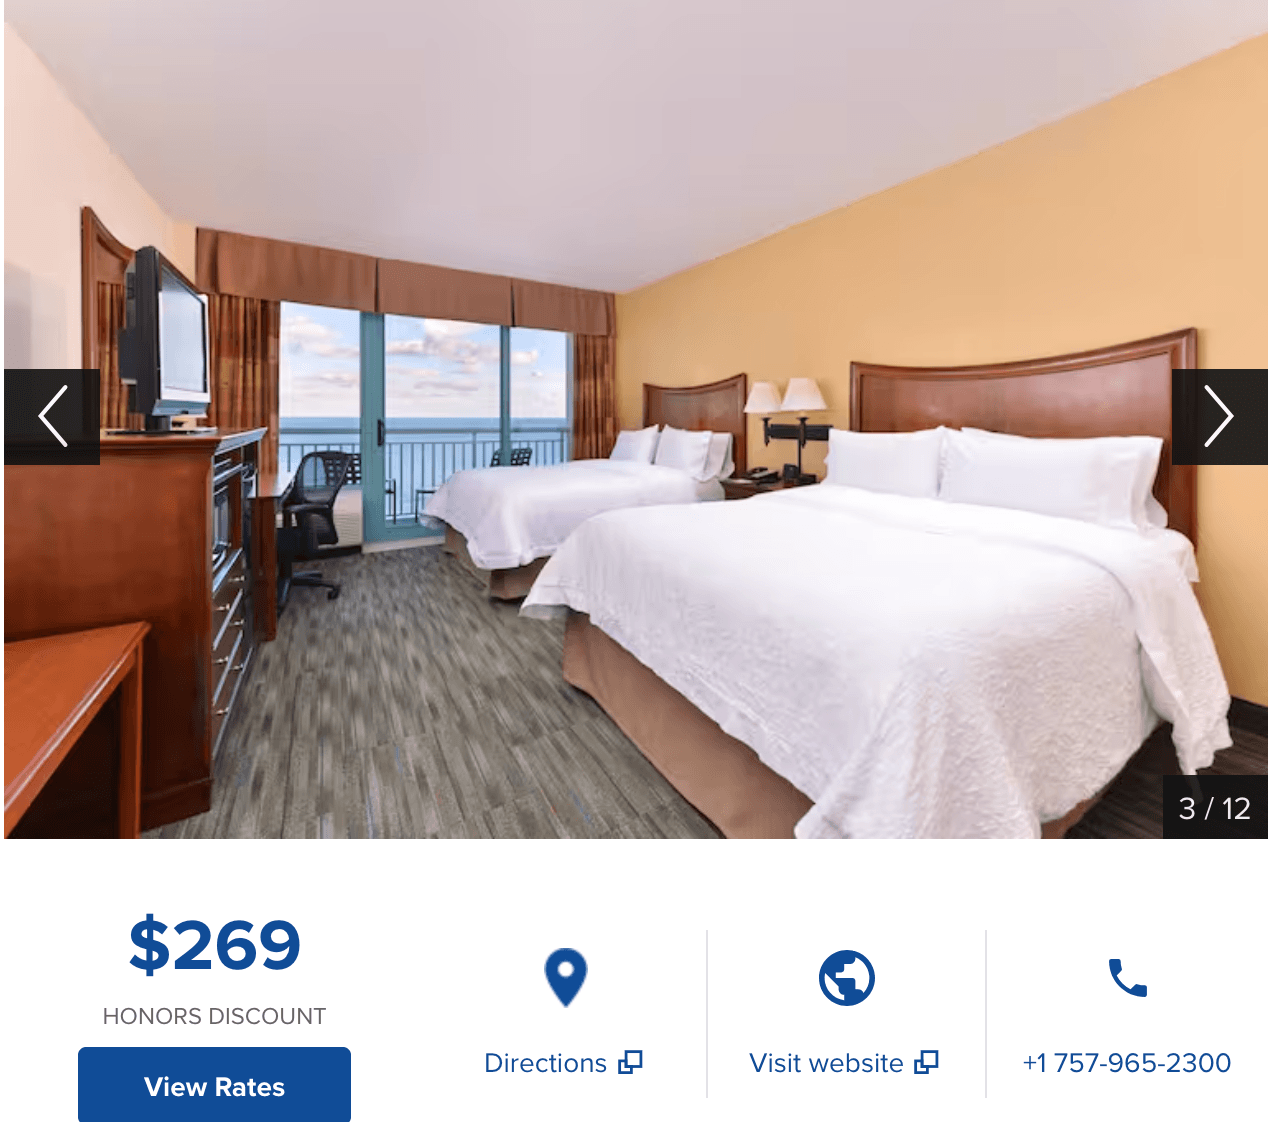 A hotel bedroom picture listed with the price of the room